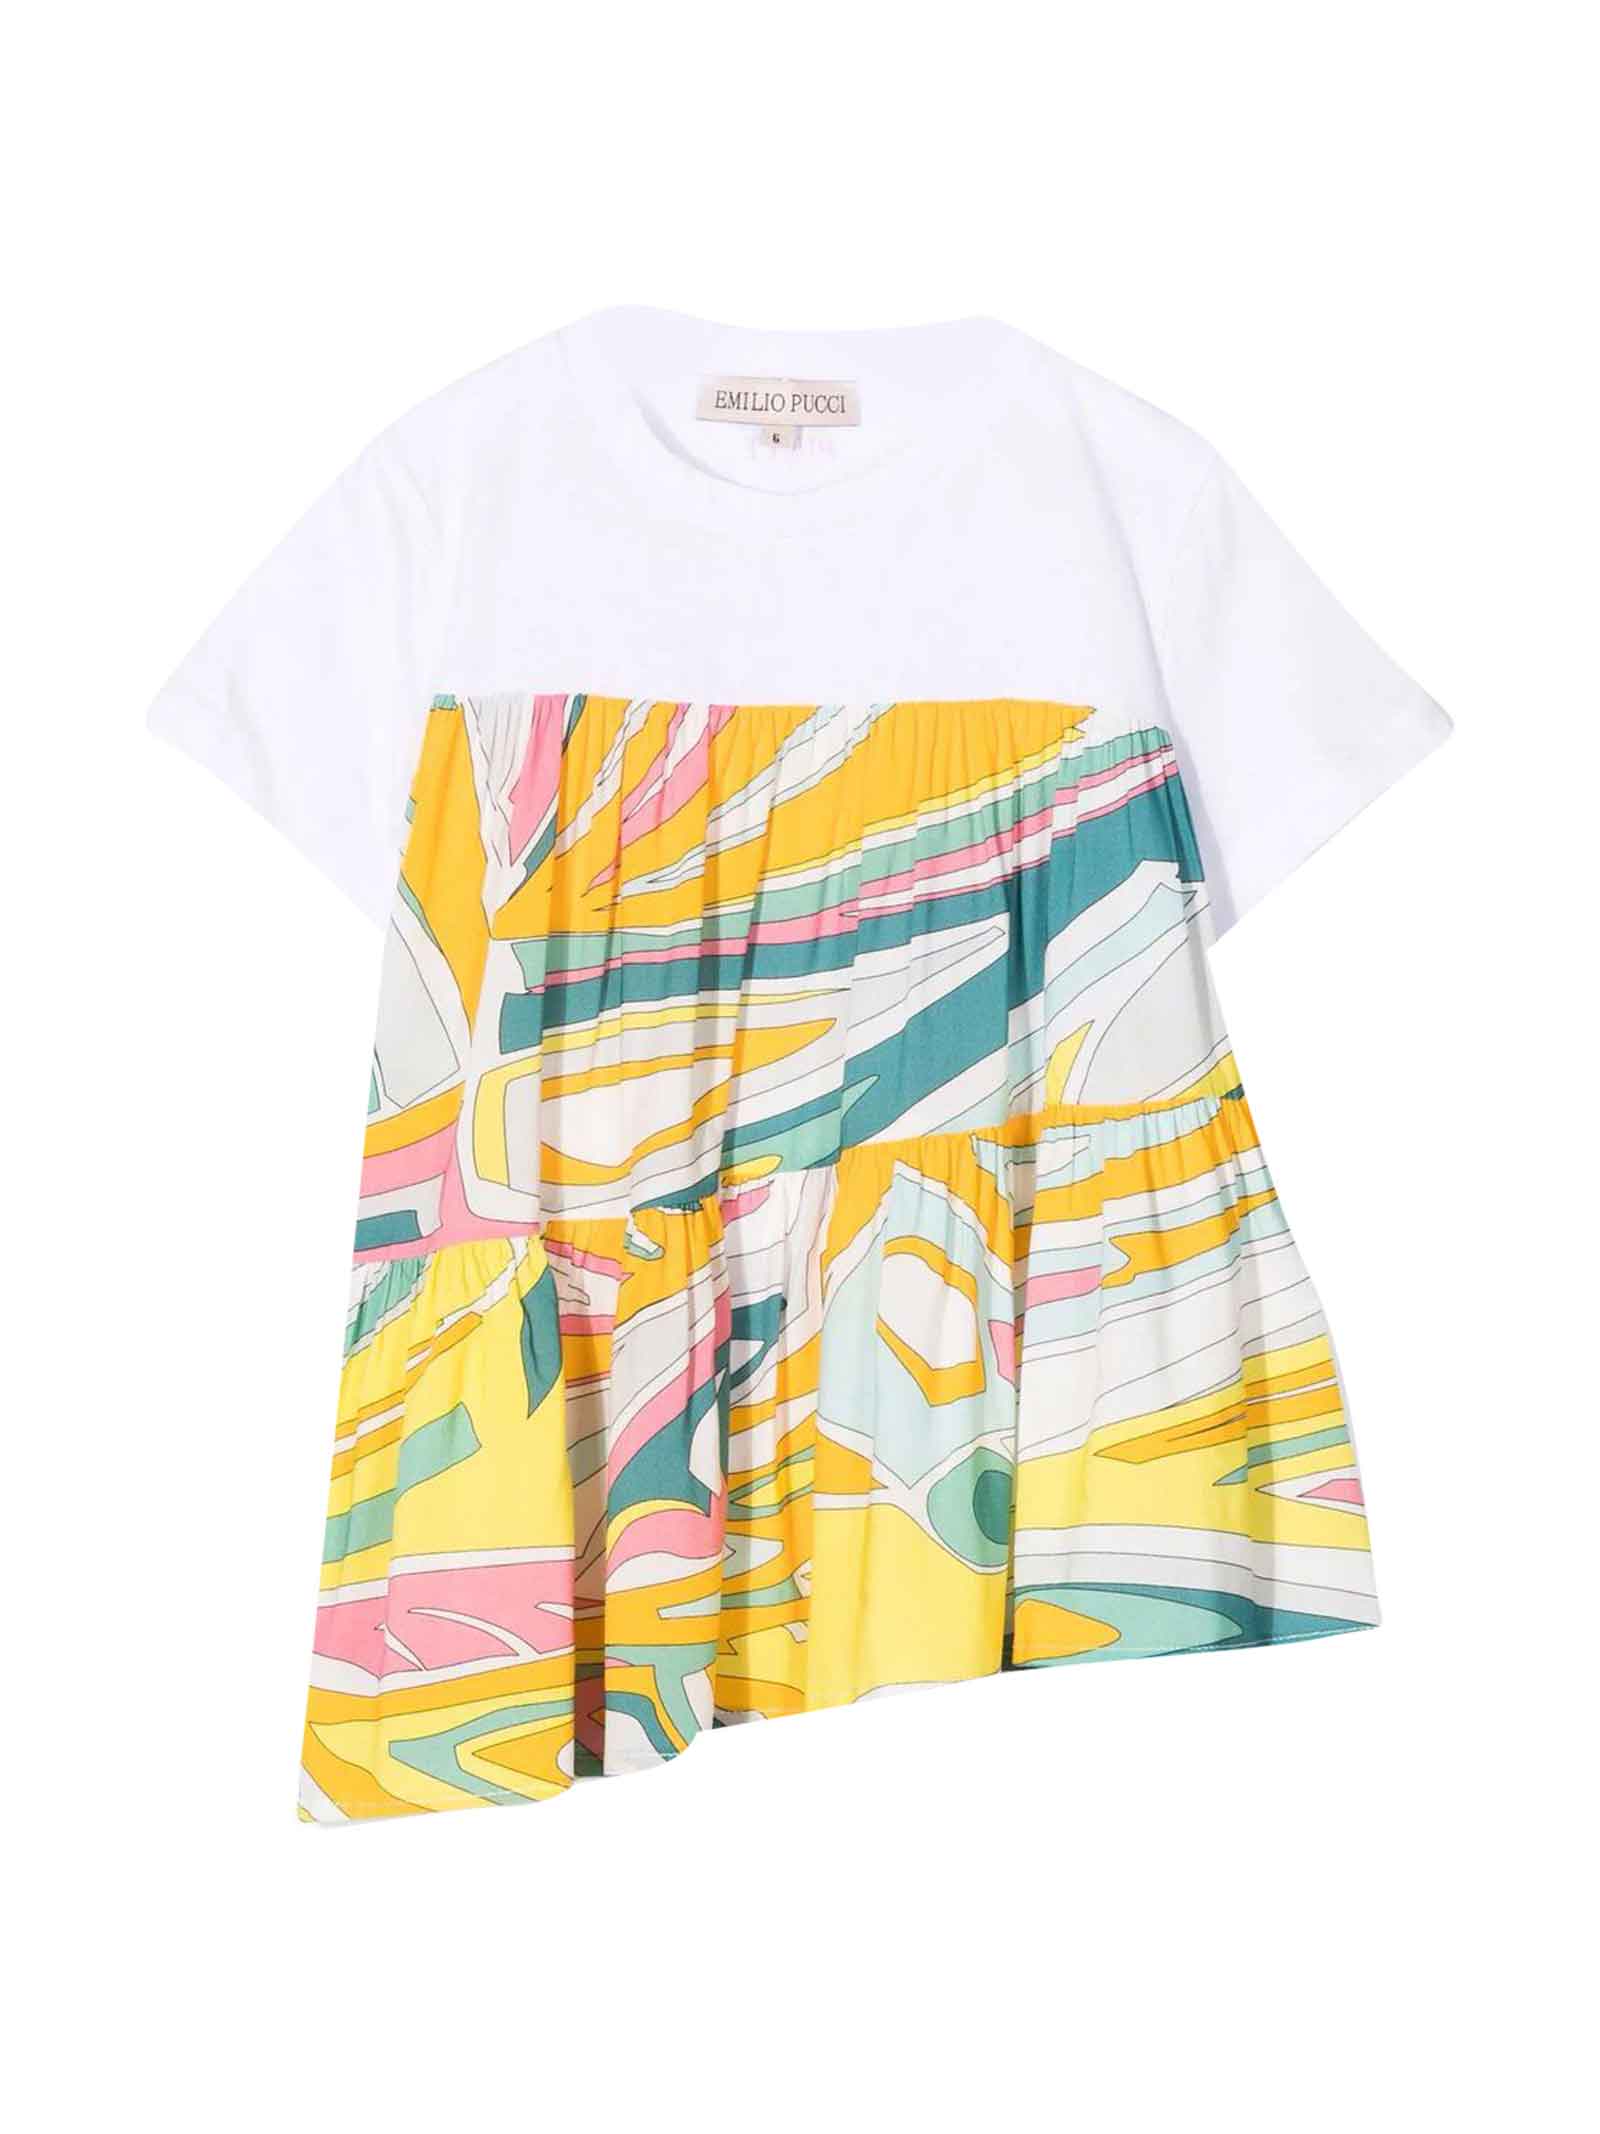 Emilio Pucci T-shirt With Asymmetrical Hem Girl Abstract Pattern, Gathered Detail, Flounced Skirt, Asymmetrical Hem, Round Neckline And Short Sleeves.